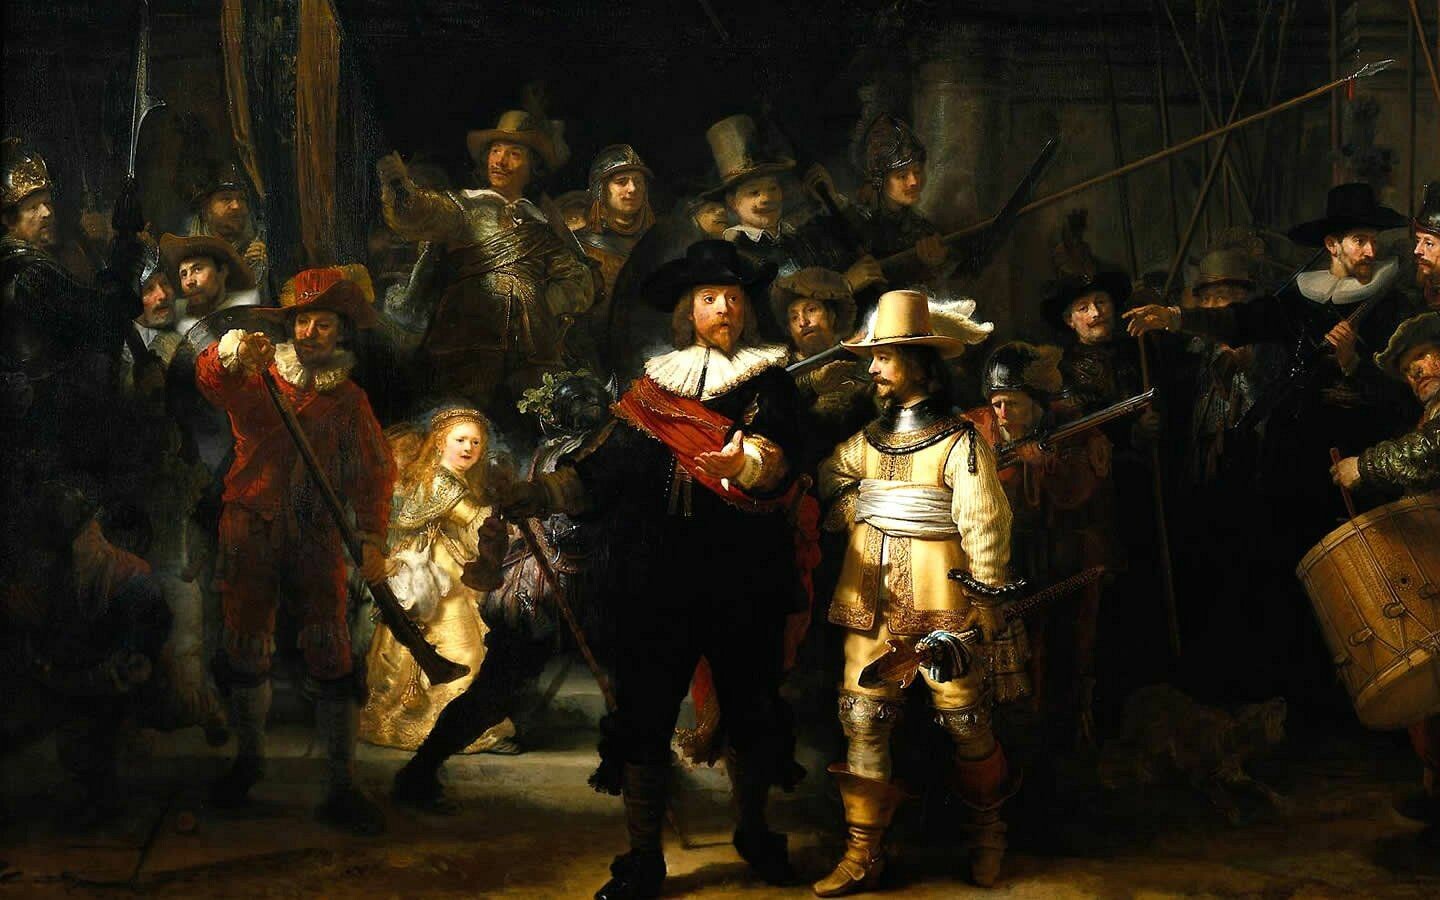 Rembrandt Paintings Wallpaper: HD, 4K, 5K for PC and Mobile. Download free image for iPhone, Android